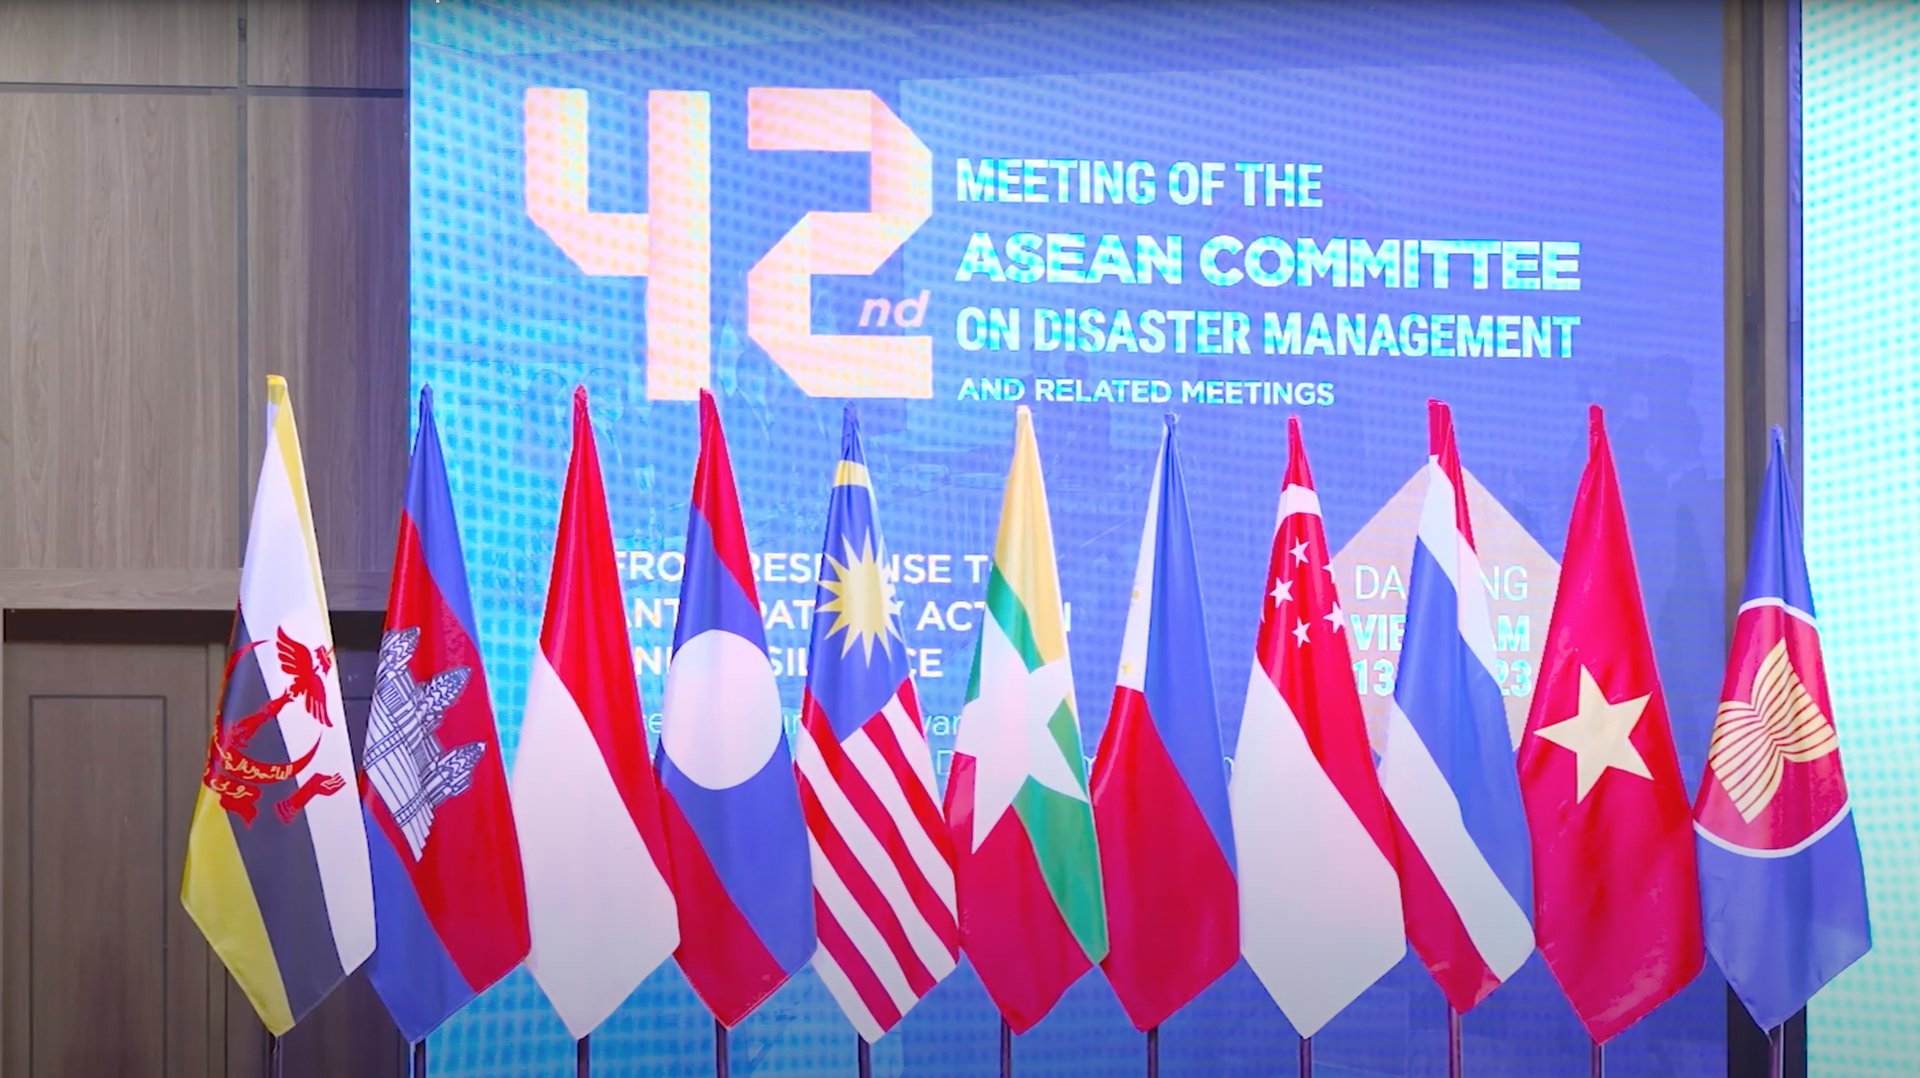 The year 2023 marks the 20th anniversary of the ASEAN Committee on Disaster Management.